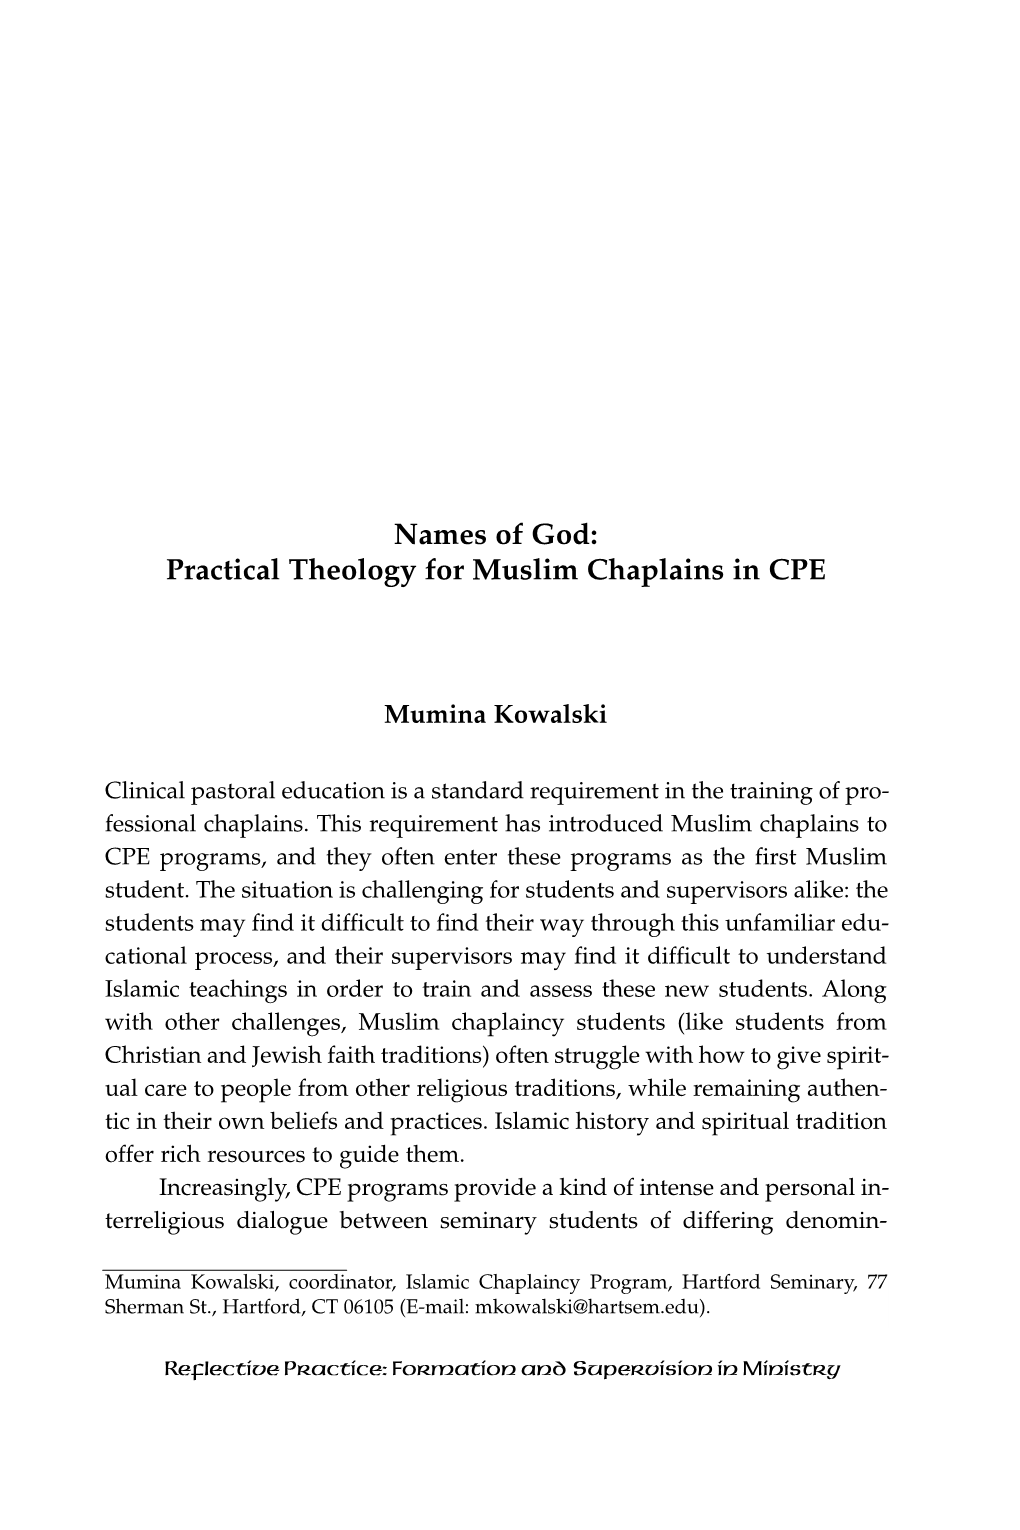 Names of God: Practical Theology for Muslim Chaplains in CPE